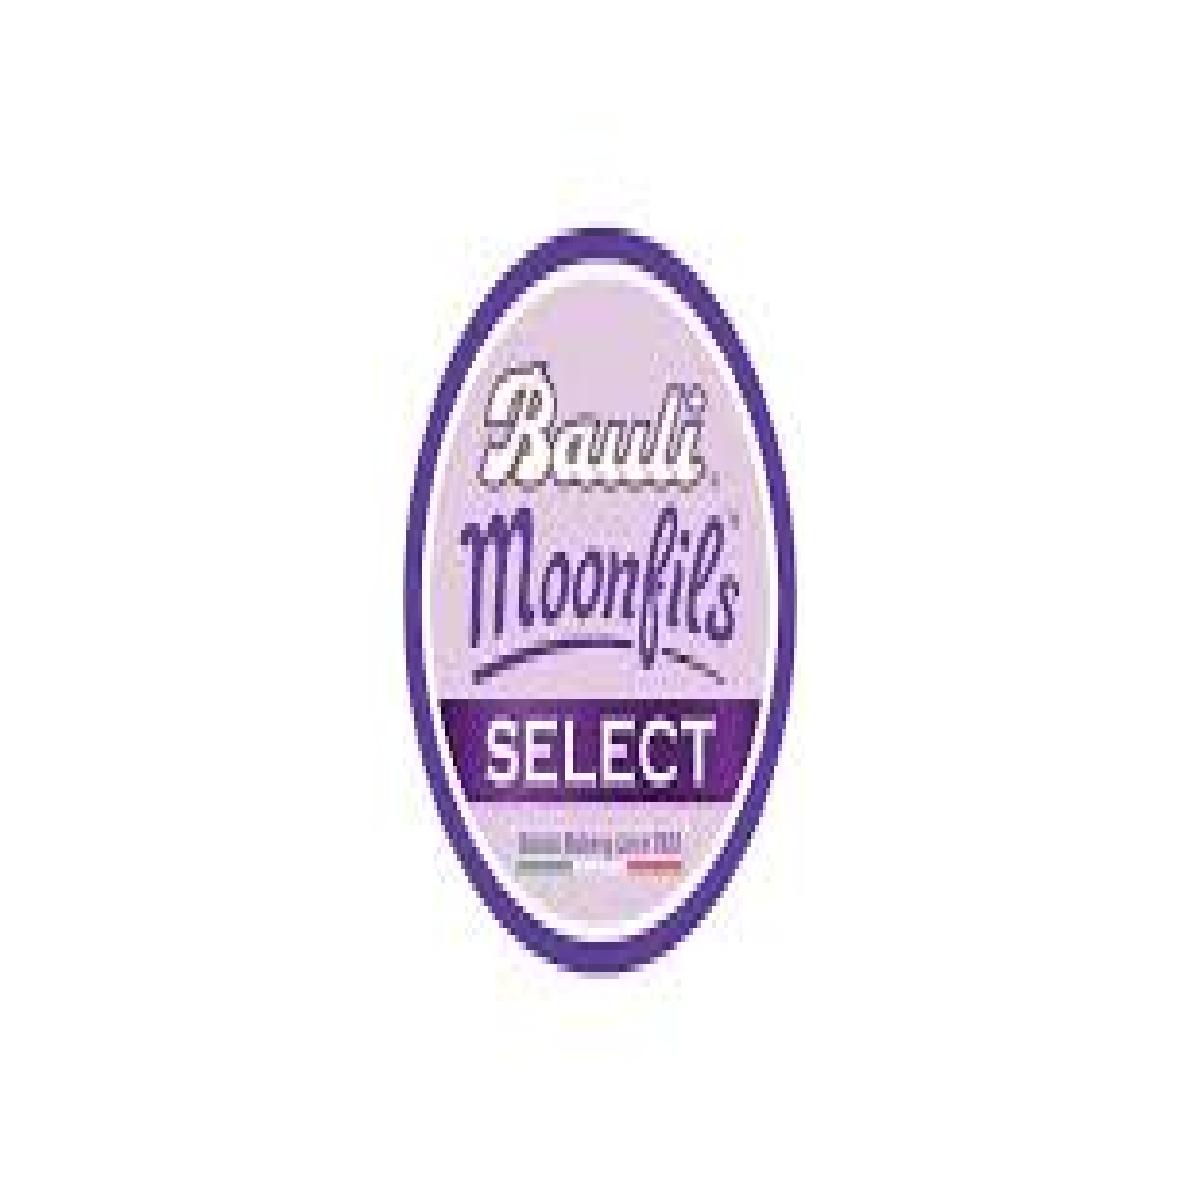 Bauli India Adds Two Premium Products to Their Moonfils Portfolio with Select